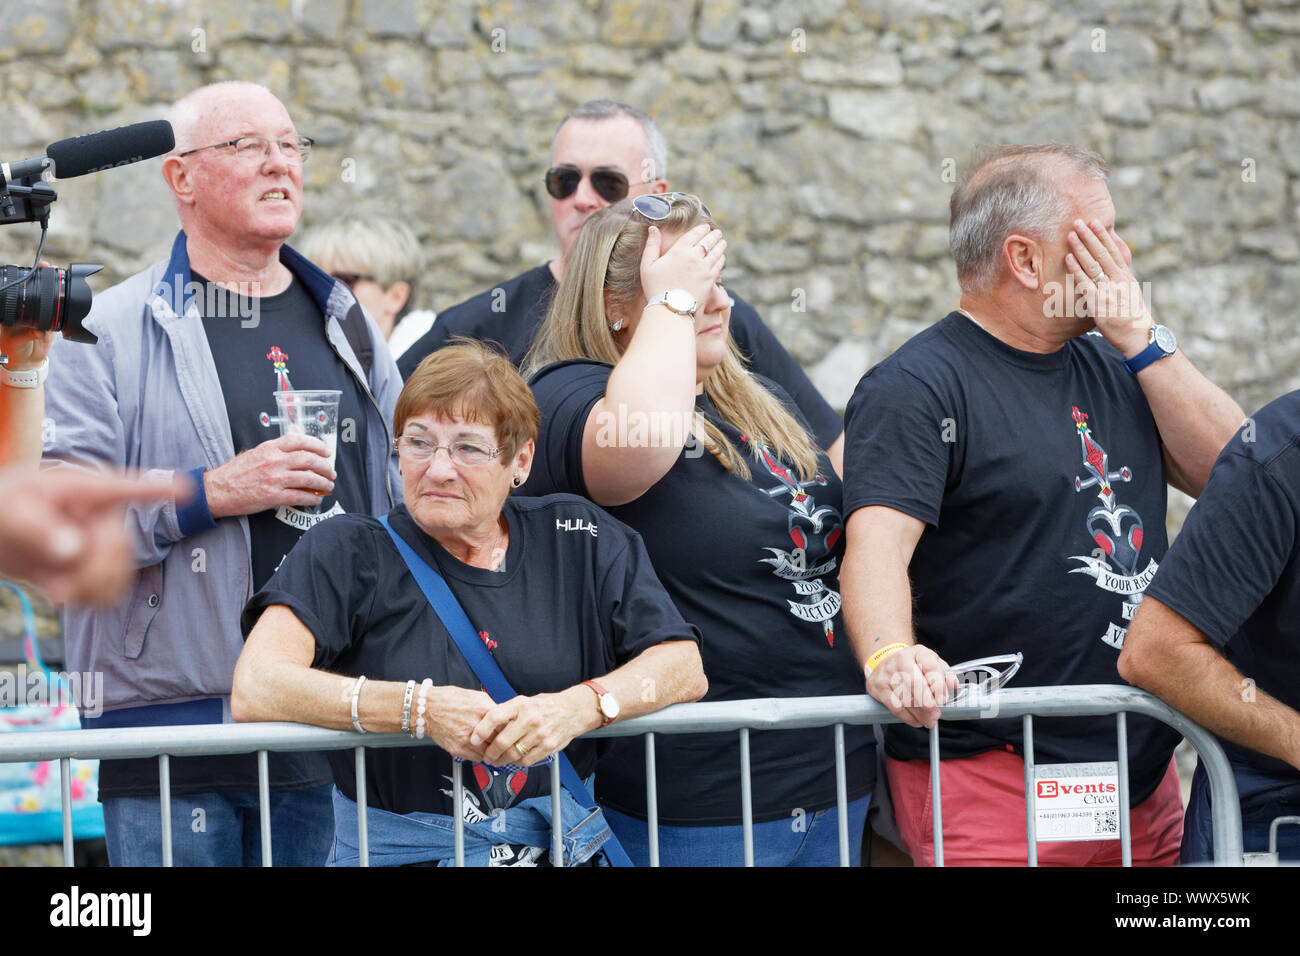 Tenby, UK. 15th Sep, 2019. Pictured: The parents of Gareth Thomas Yvonne (2nd L), Barry (L) and husband Stephen (R). Sunday 15 September 2019 Re: Ironman triathlon event in Tenby, Wales, UK. Credit: ATHENA PICTURE AGENCY LTD/Alamy Live News Stock Photo